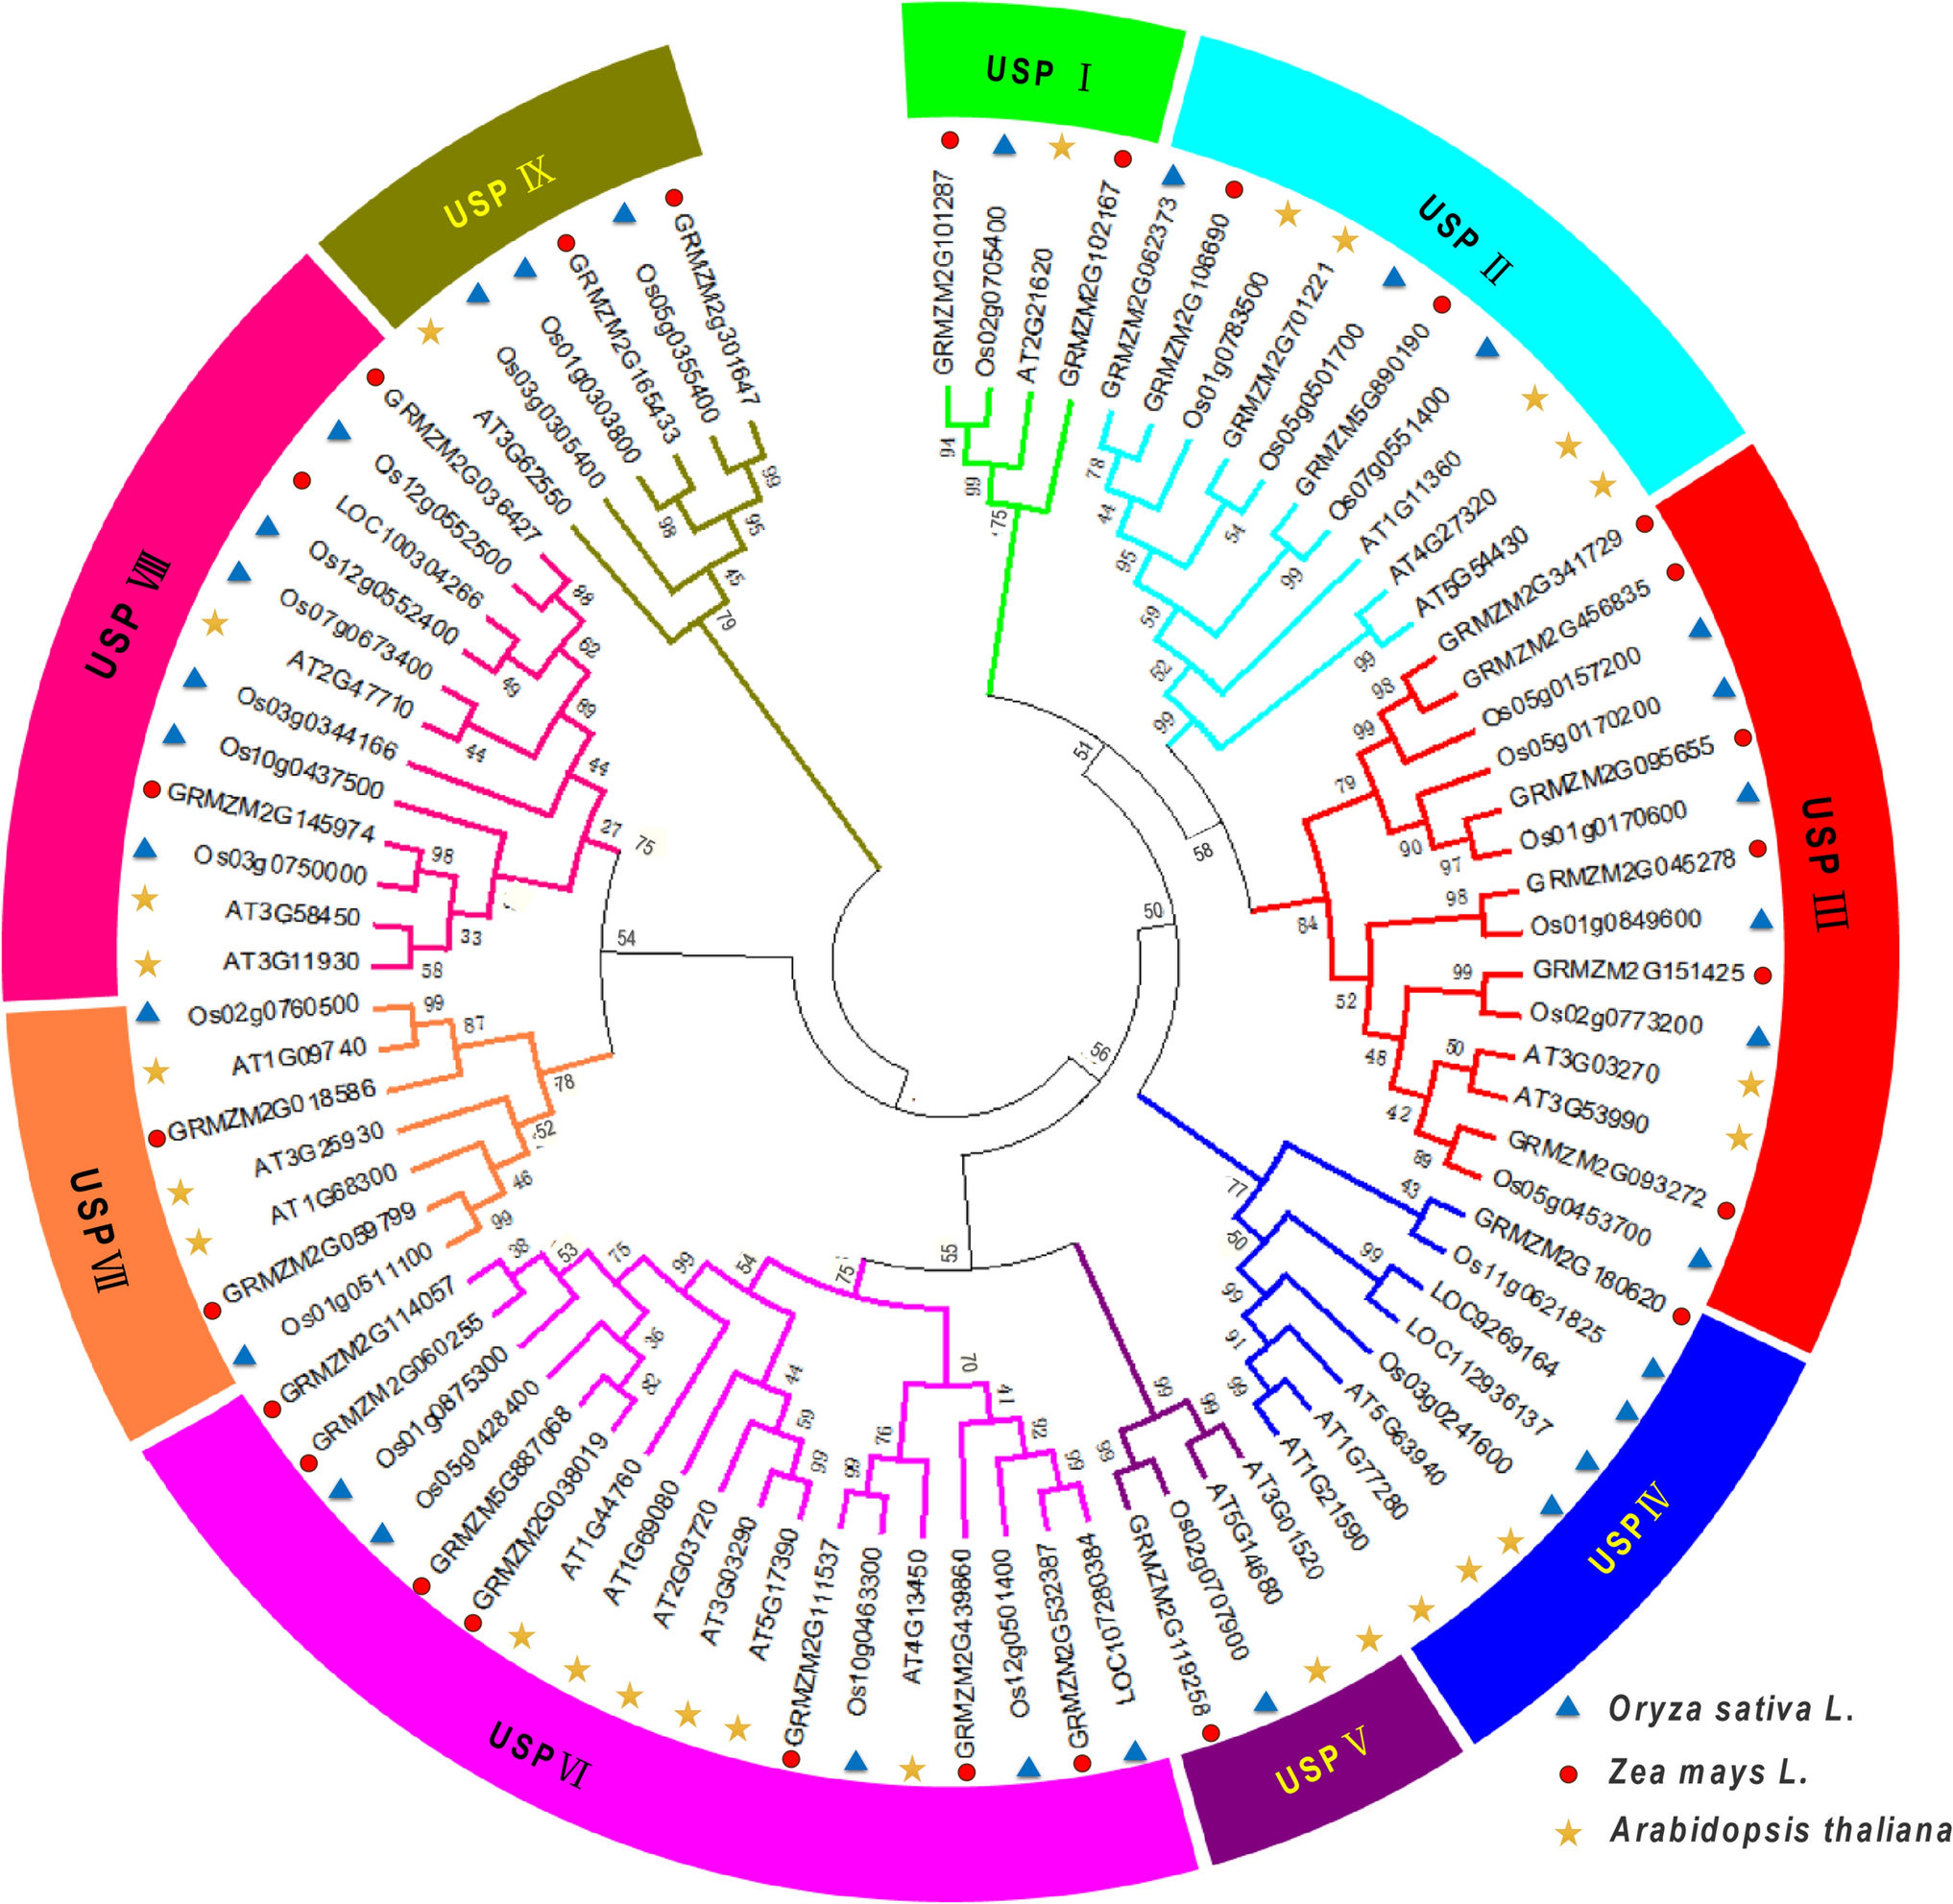 Genome-wide identification and expression analysis of the universal stress protein (USP) gene family in Arabidopsis thaliana, Zea mays, and Oryza sativa